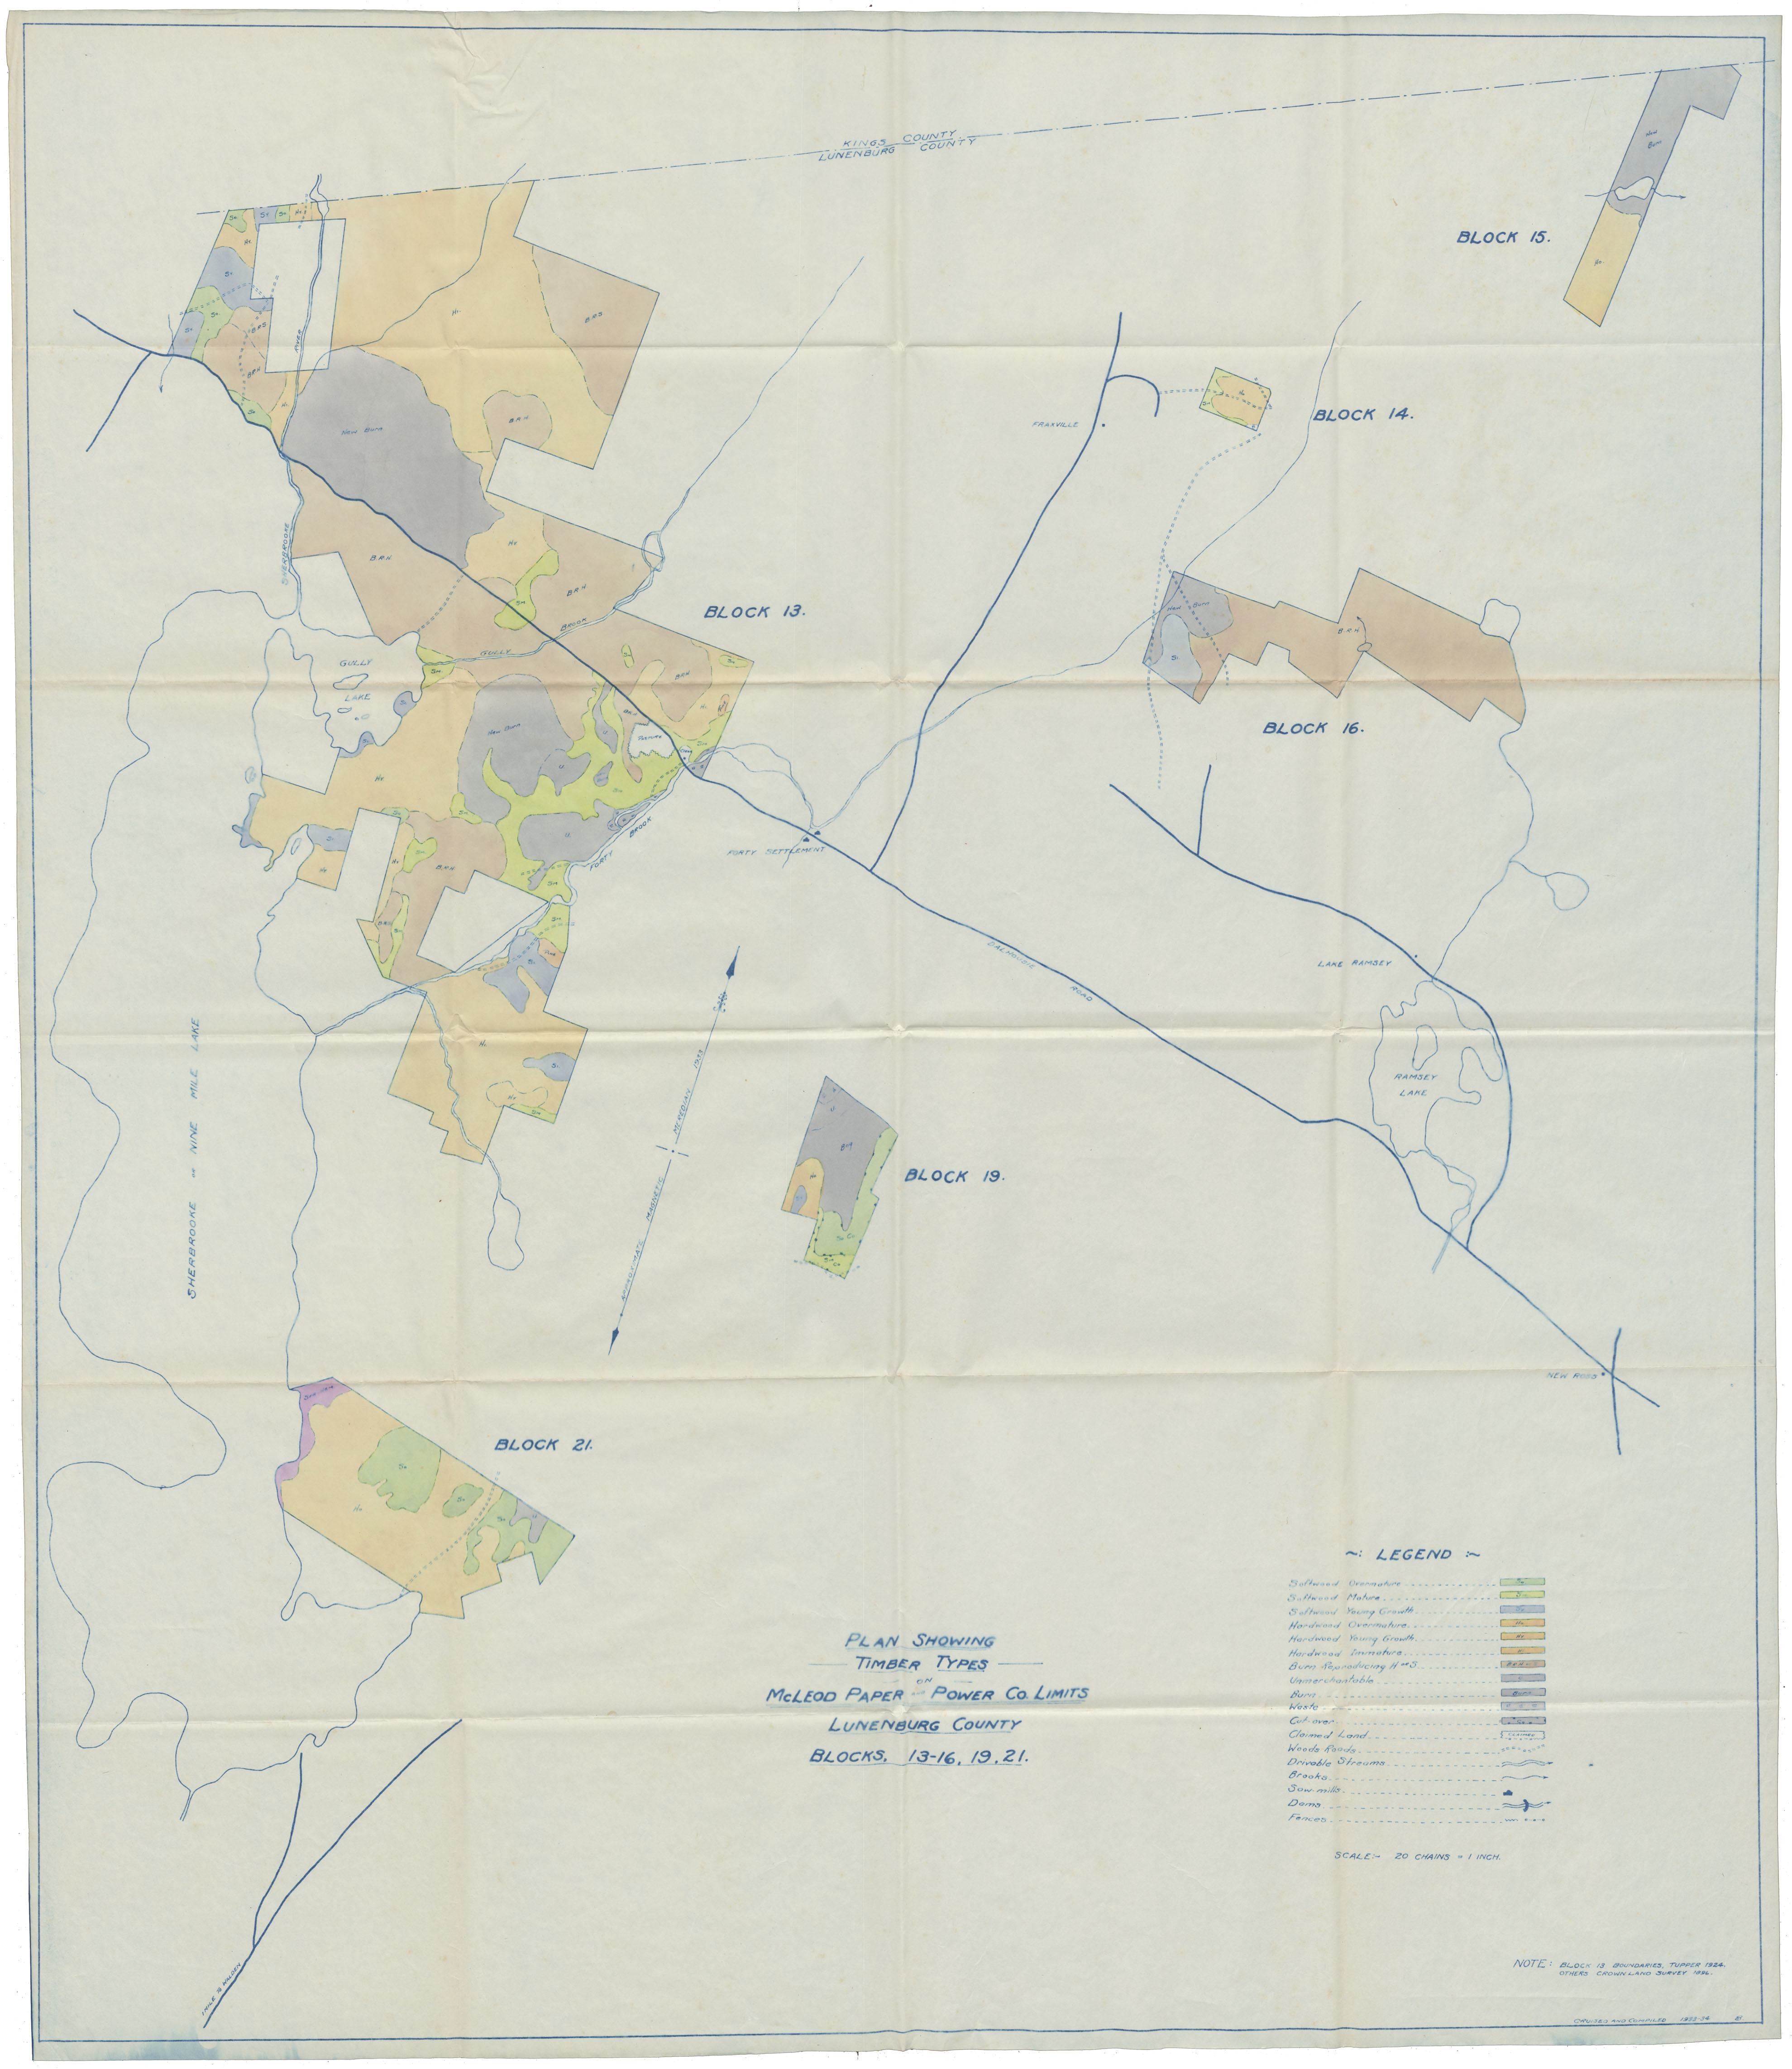 Lunenburg County Plan showing Timber Types McLeod Paper & Power County.Lun., 13-16.19.21